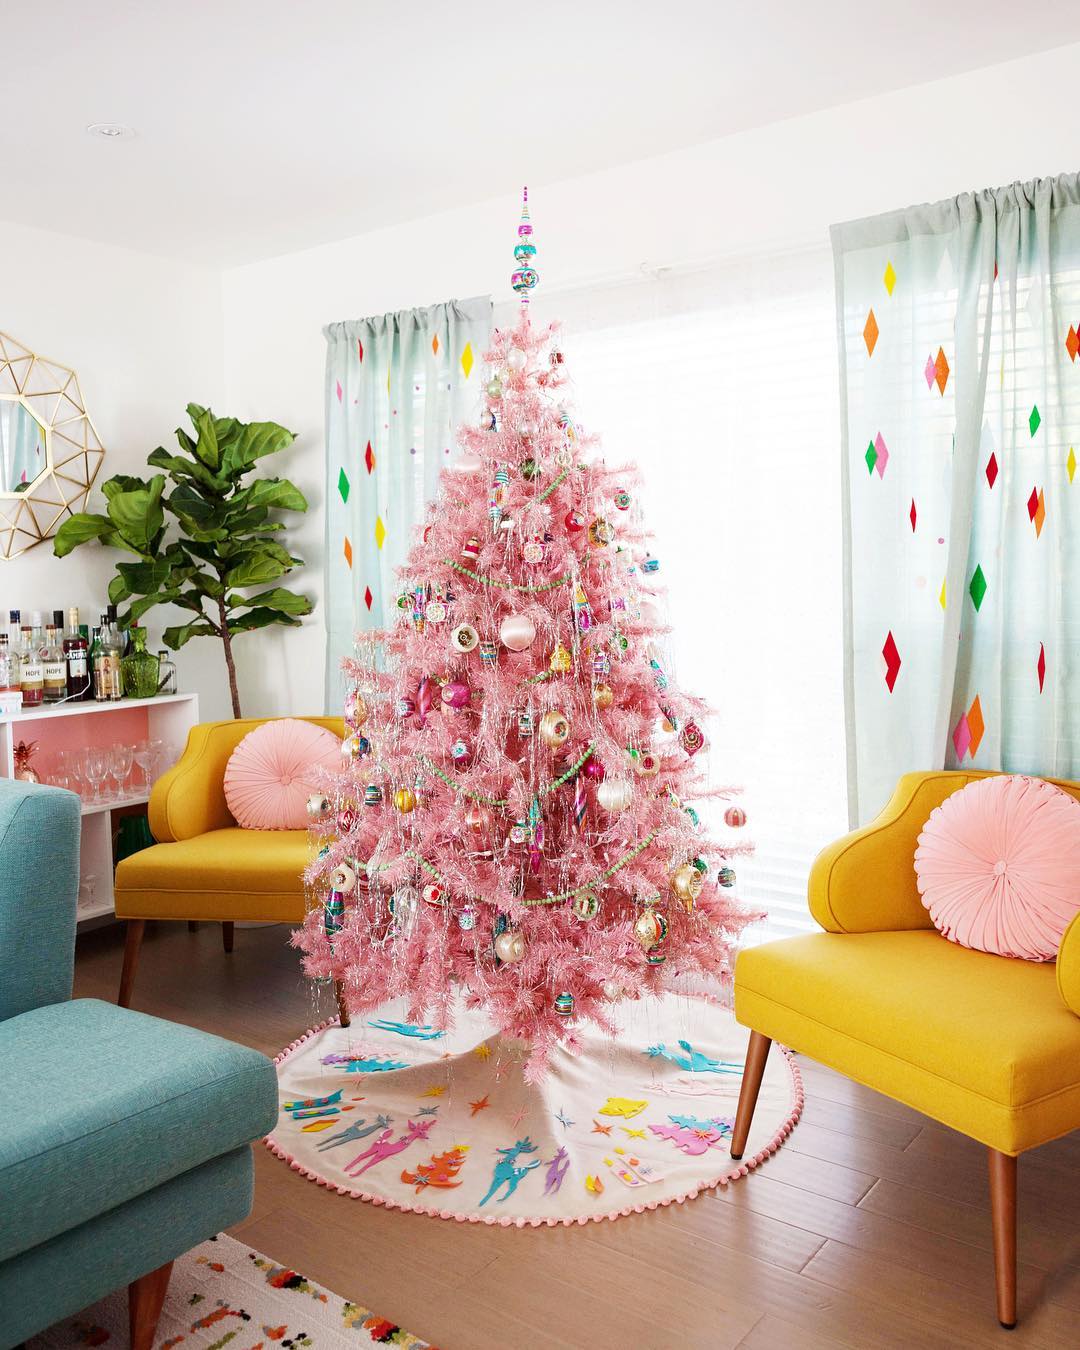 10 Charming Living Rooms to Inspire Your Holiday Decor